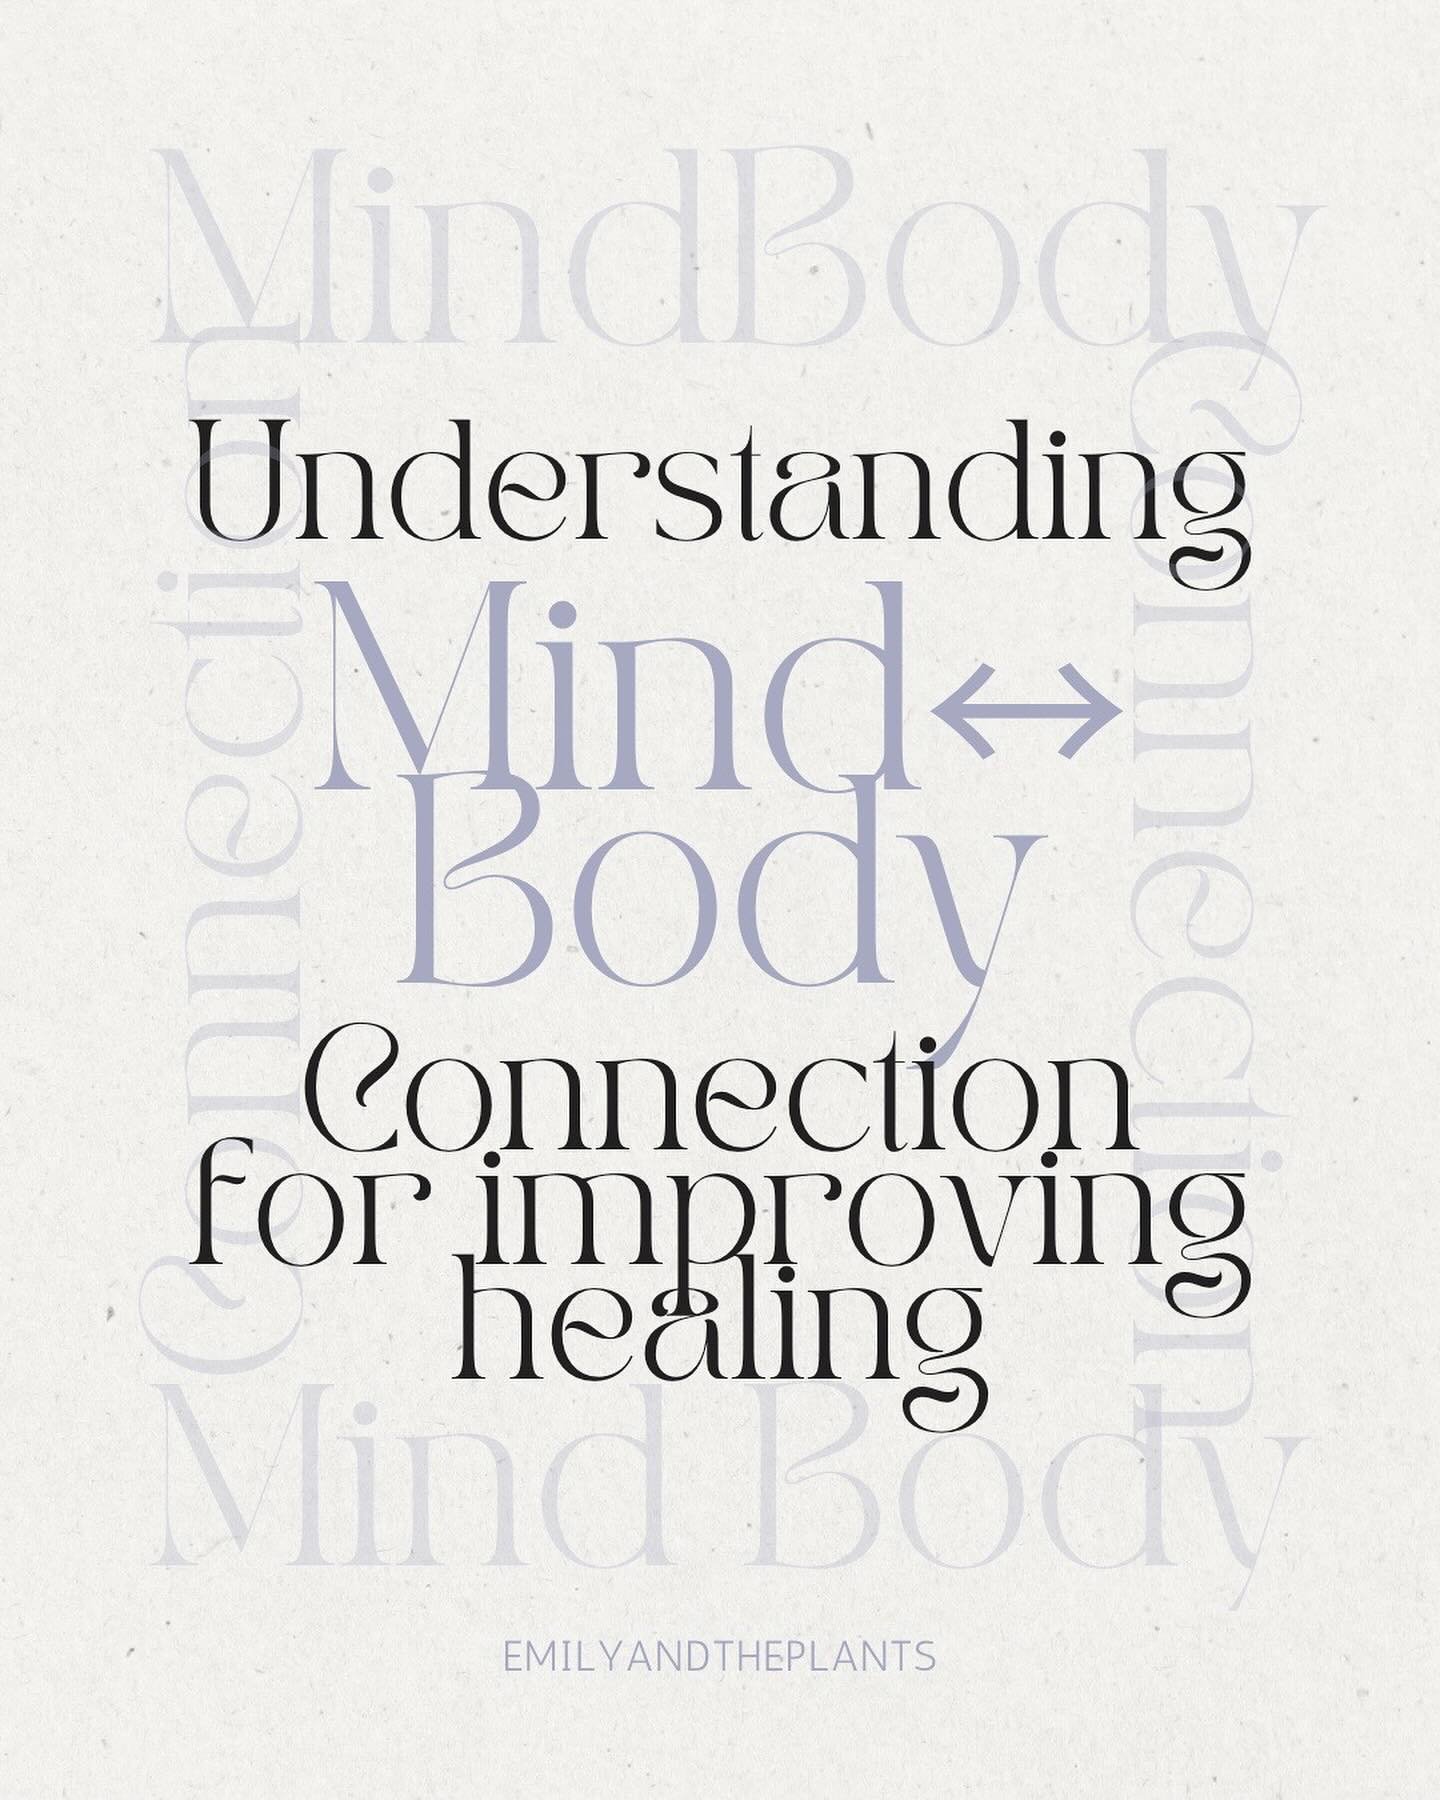 Can you read the signals your body&rsquo;s always sending?&hellip;

Mind body connection is like a communication channel between the physical body and your brain 

Our bodies are always talking to us. Speaking in gentle whispers, nudges, feelings&hel